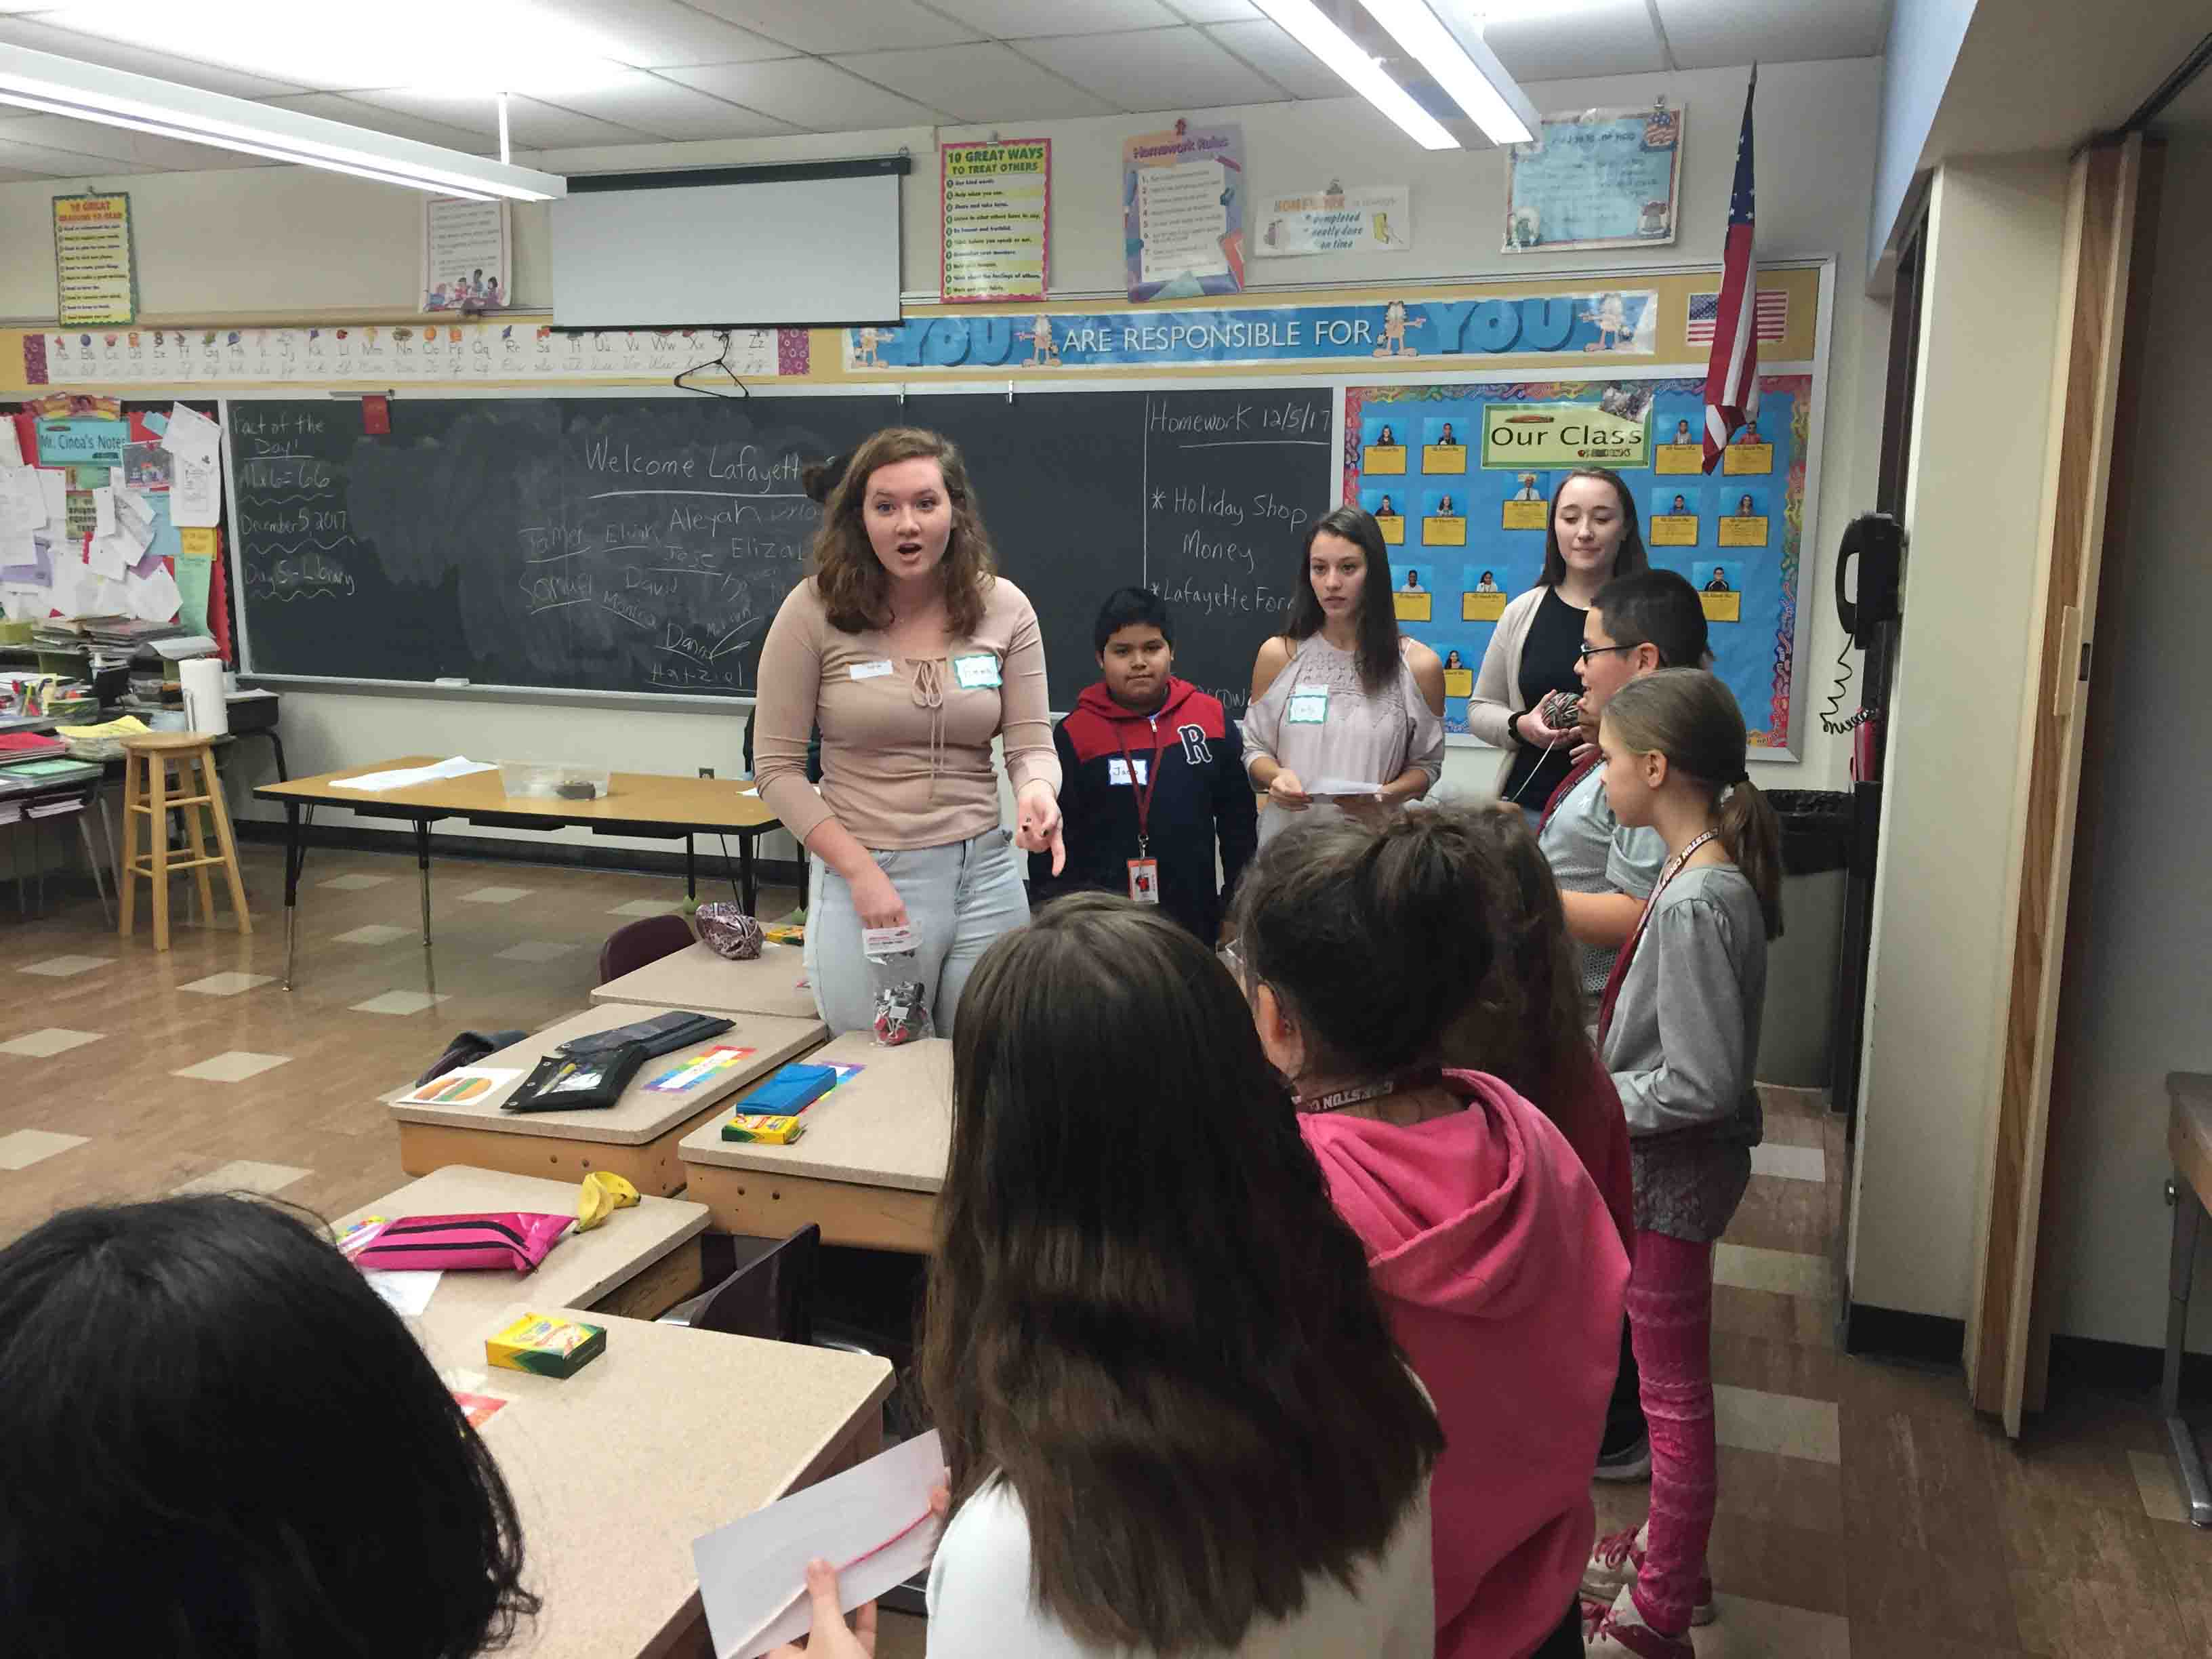 A Lafayette student teaches Cheston Elementary children about climate change in a classroom session.